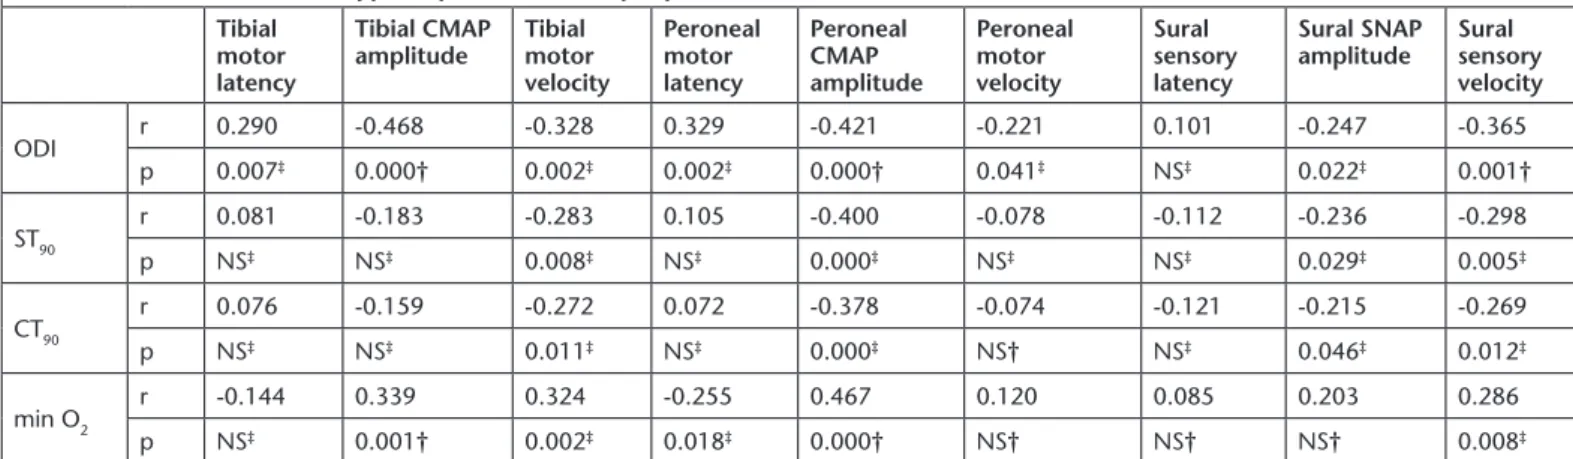 Table 2. Correlation between hypoxia parameters and peripheral nerves Tibial 